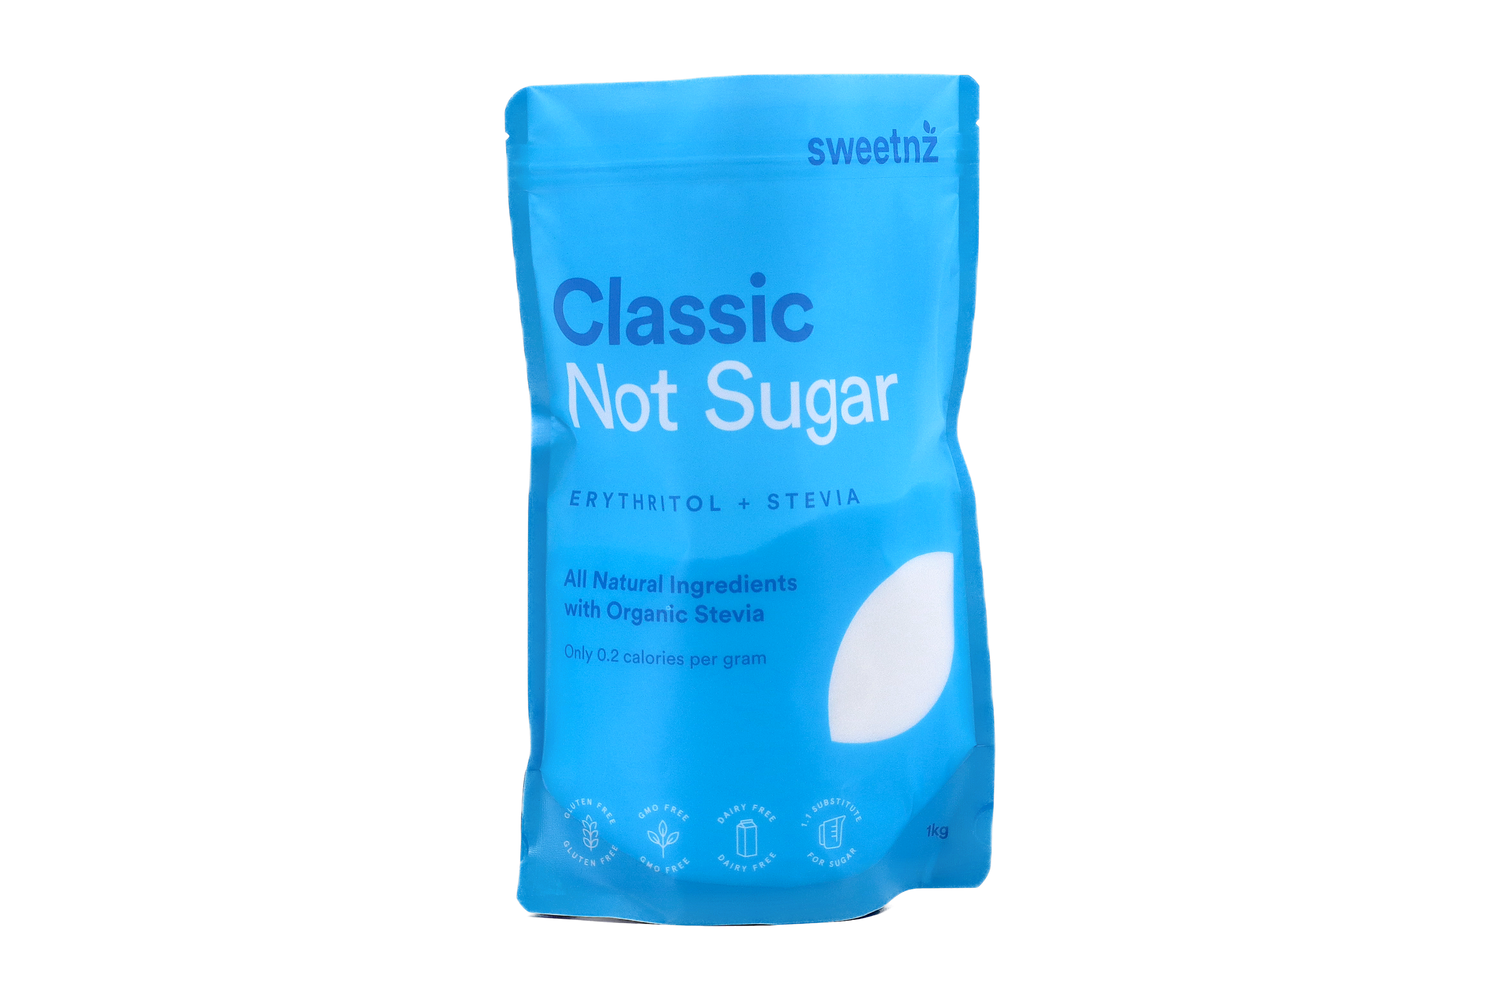 Classic Not Sugar 1kg front view. All natural ingredients with organic Stevia. 